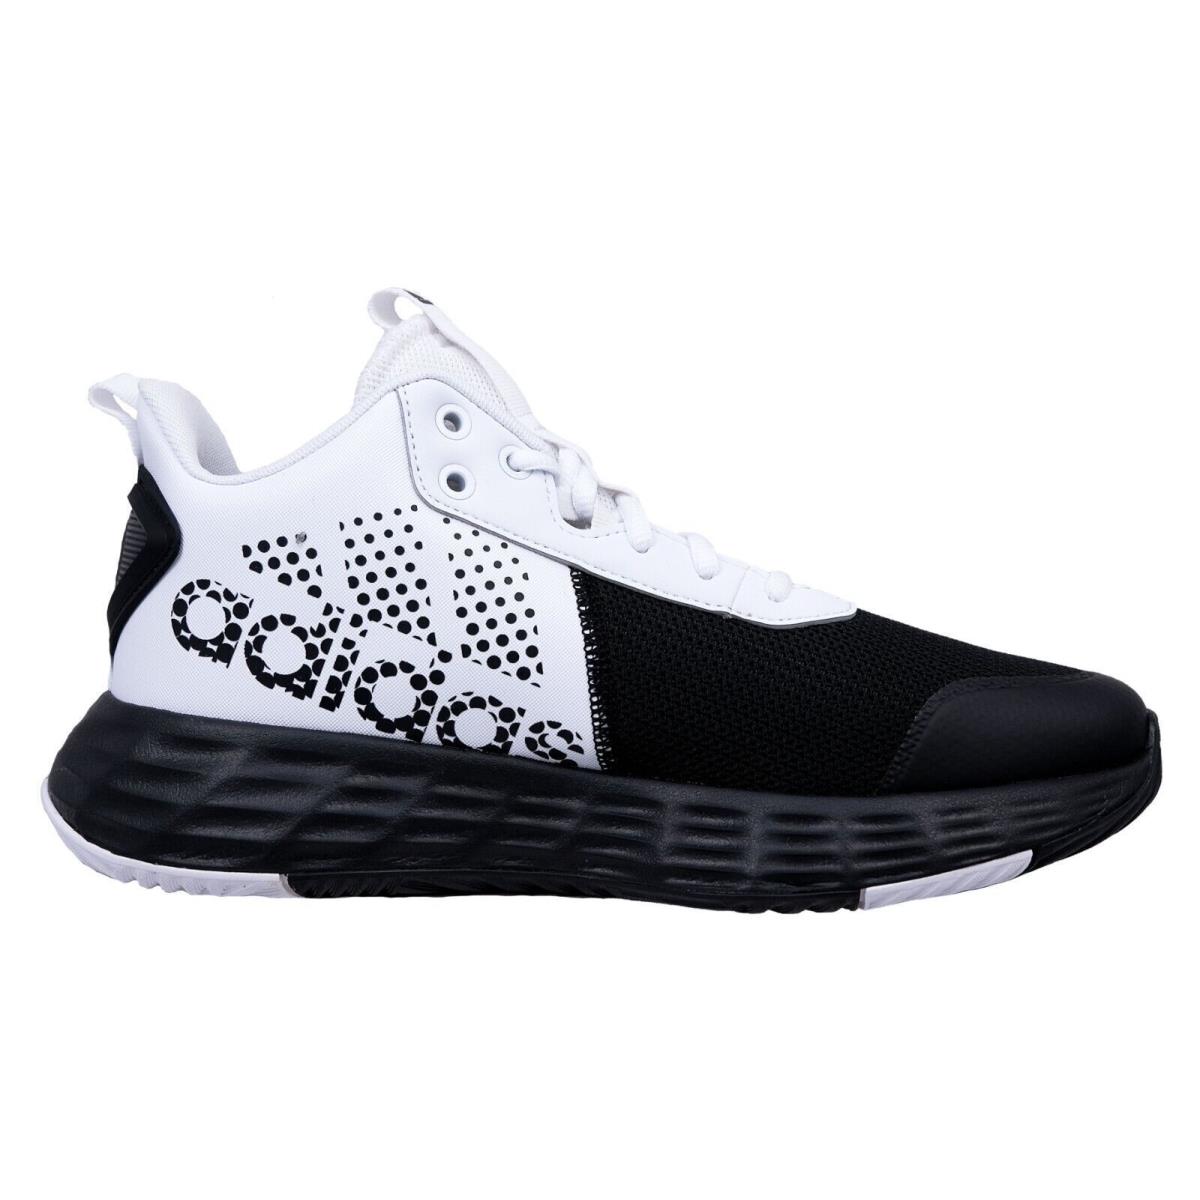 Adidas Own The Game 2.0 Sneakers Mens Basketball Black/white GY9696 W/box